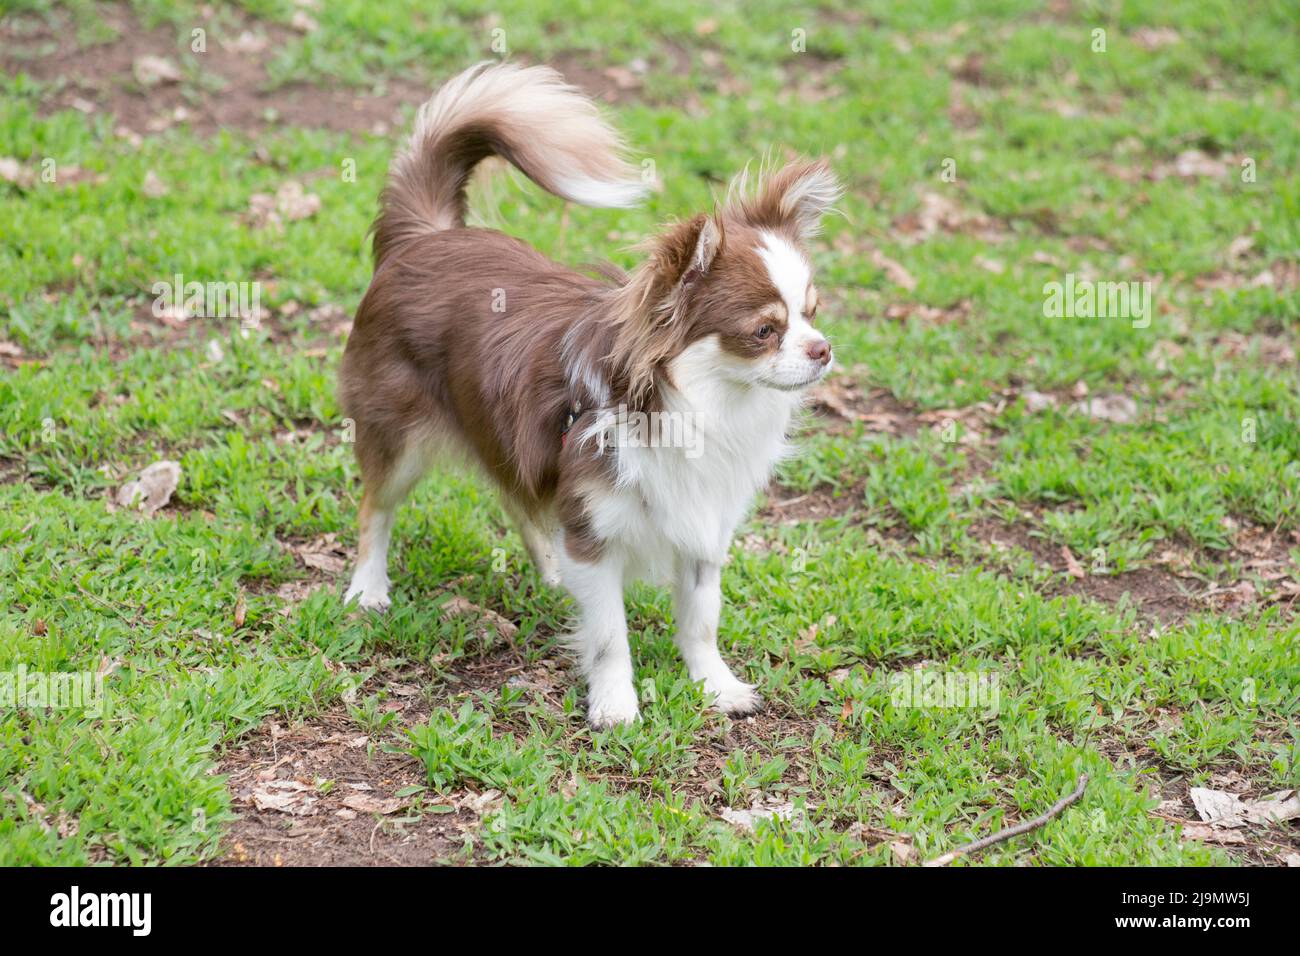 Cute long-haired chihuahua puppy is standing on a green grass in the spring park and looking away. Pet animals. Purebred dog. Stock Photo